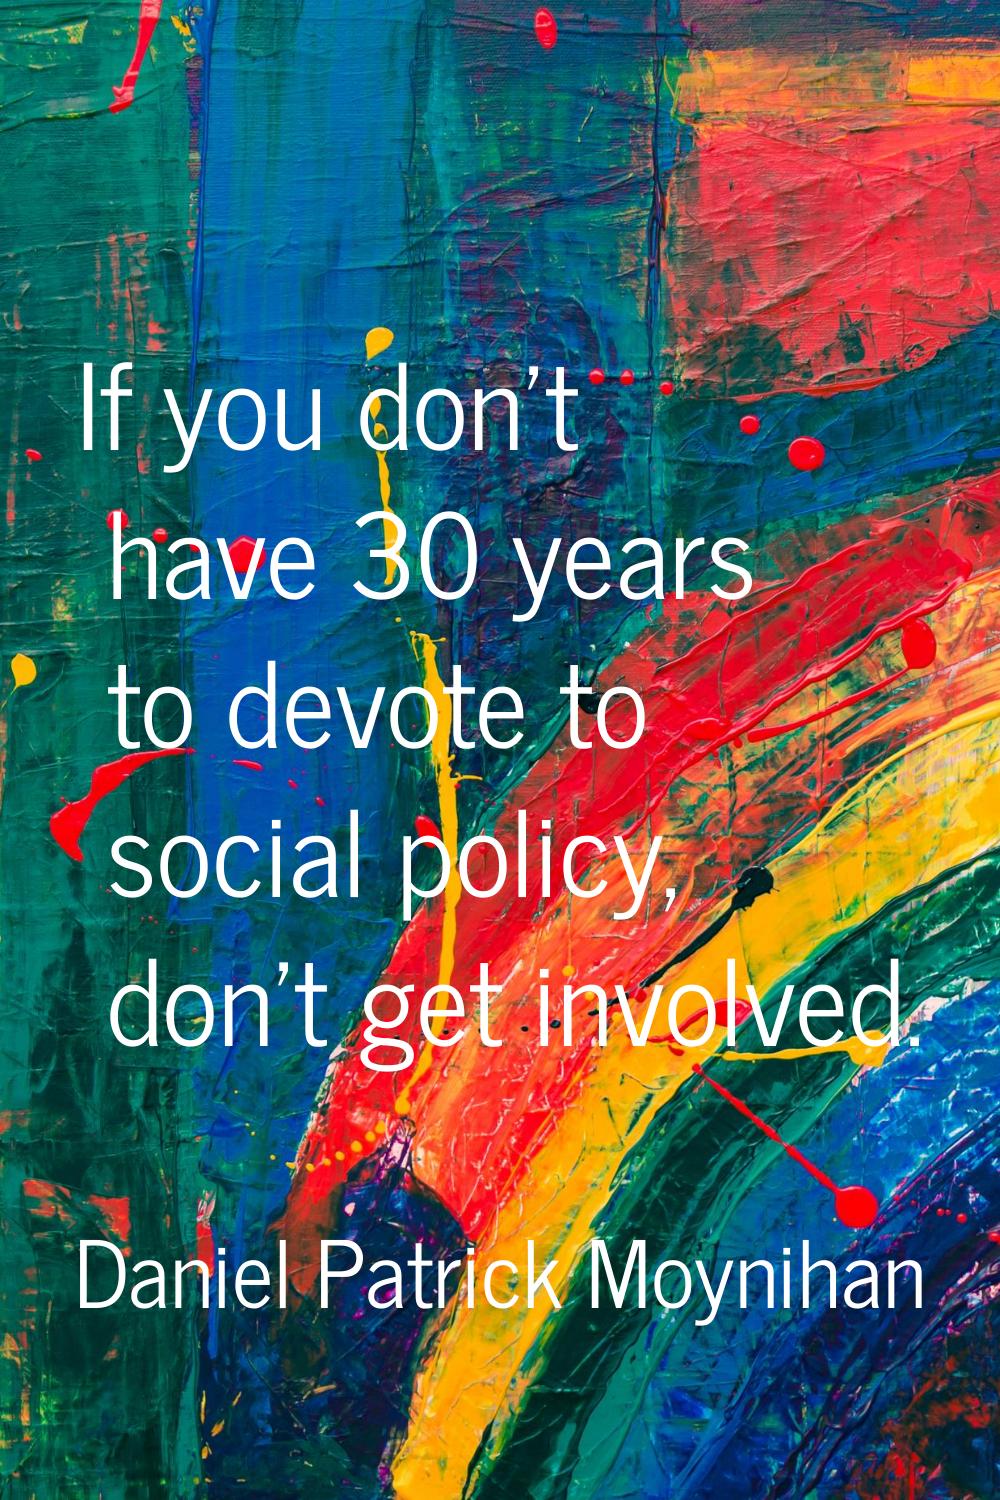 If you don't have 30 years to devote to social policy, don't get involved.